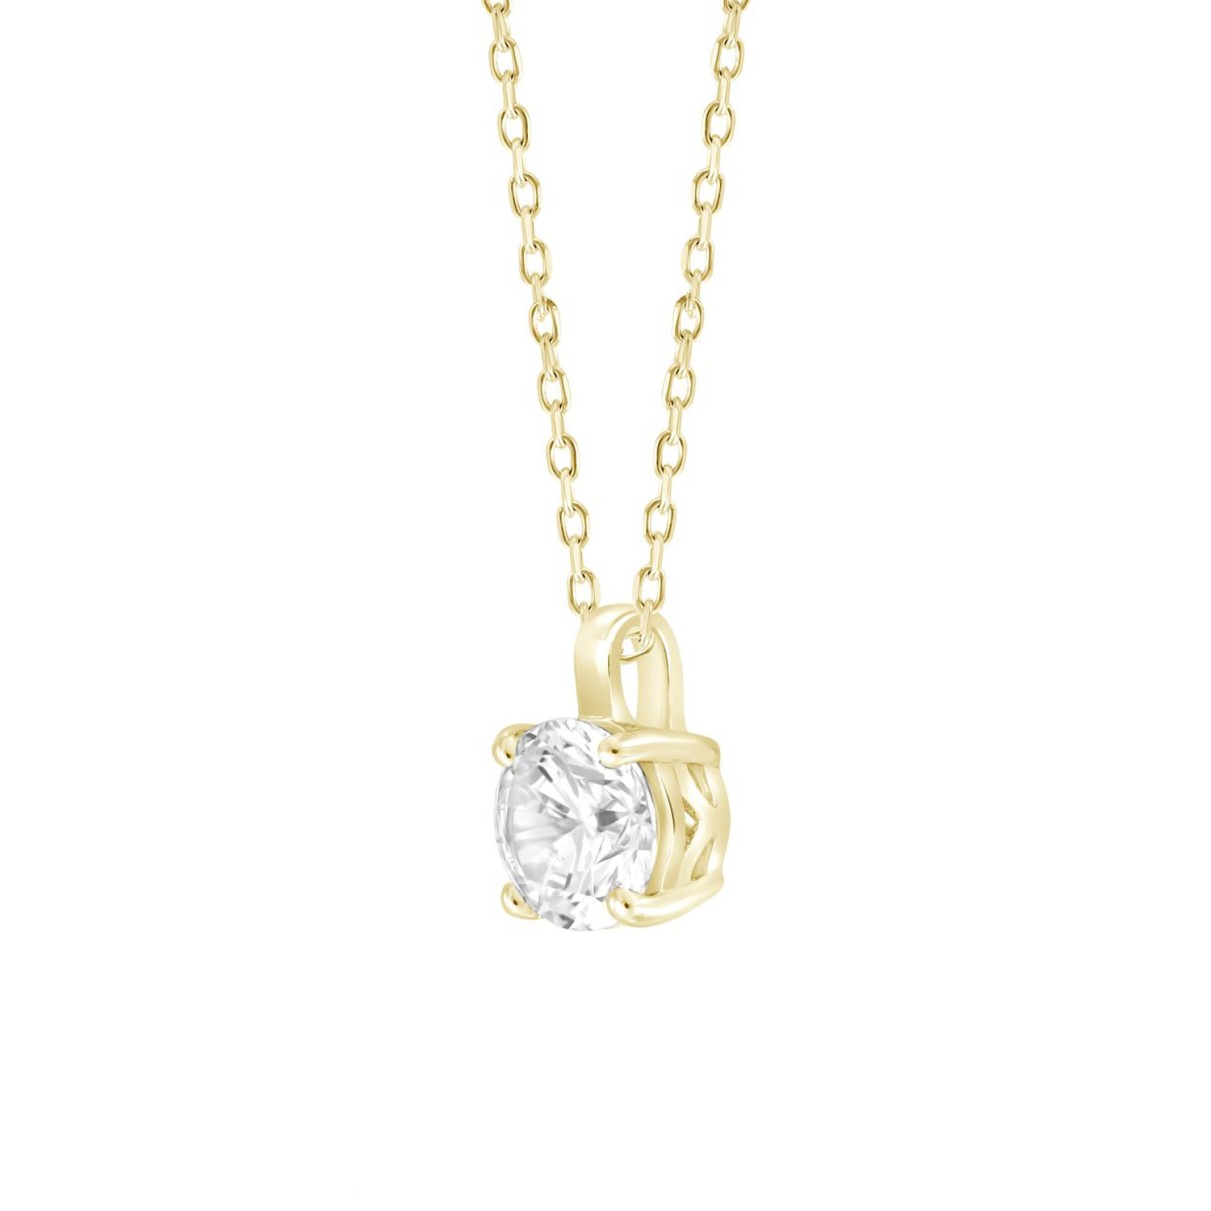 LADIES SOLITAIRE PENDANT 3CT ROUND DIAMOND 14K YELLOW GOLD WITH CHAIN